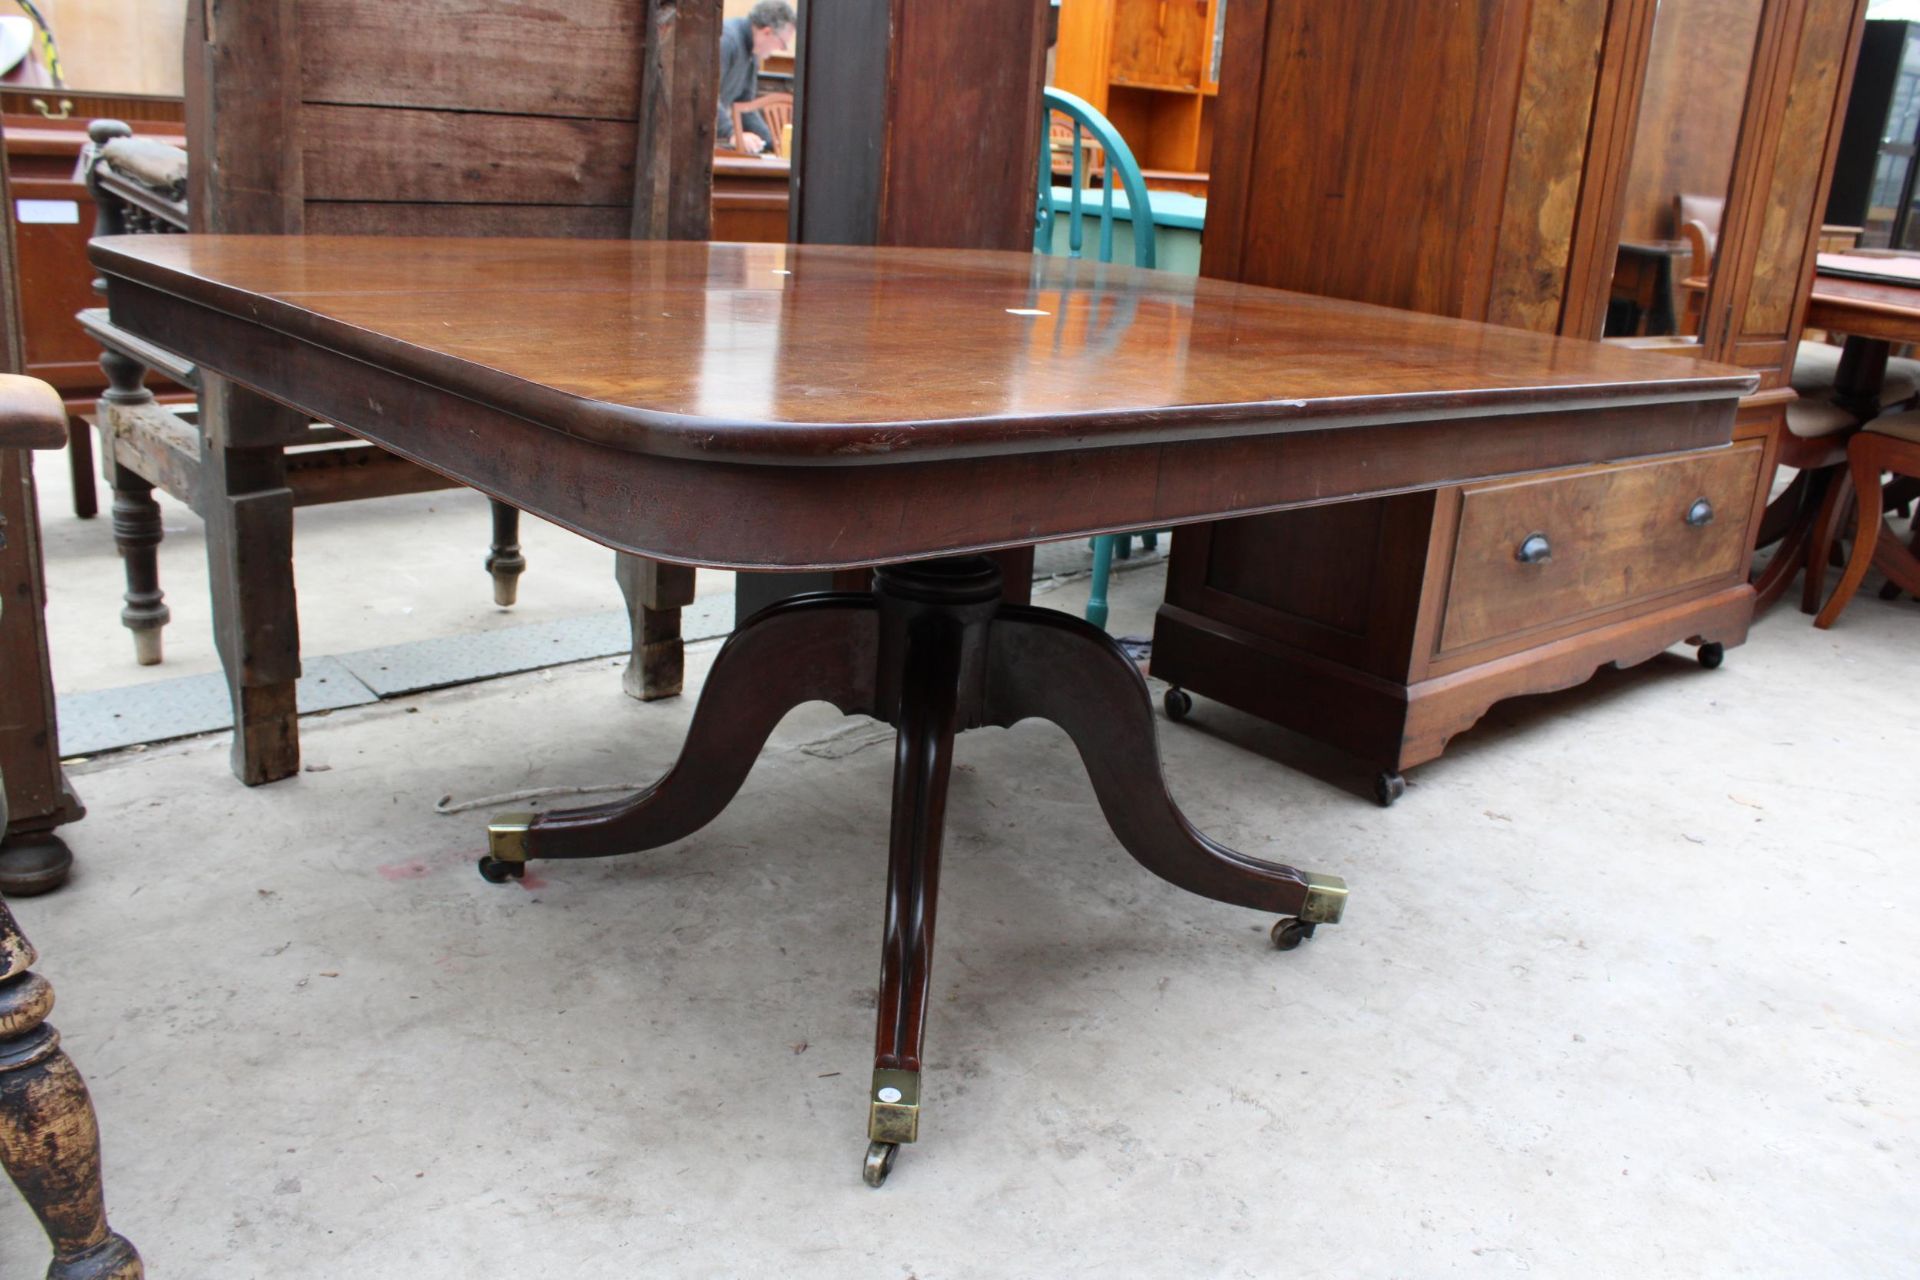 A REGENCY STYLE MAHOGANY PEDESTAL TILT-TOP DINING TABLE 56" X 46.5" WITH BRASS FEET AND CASTERS - Image 2 of 3